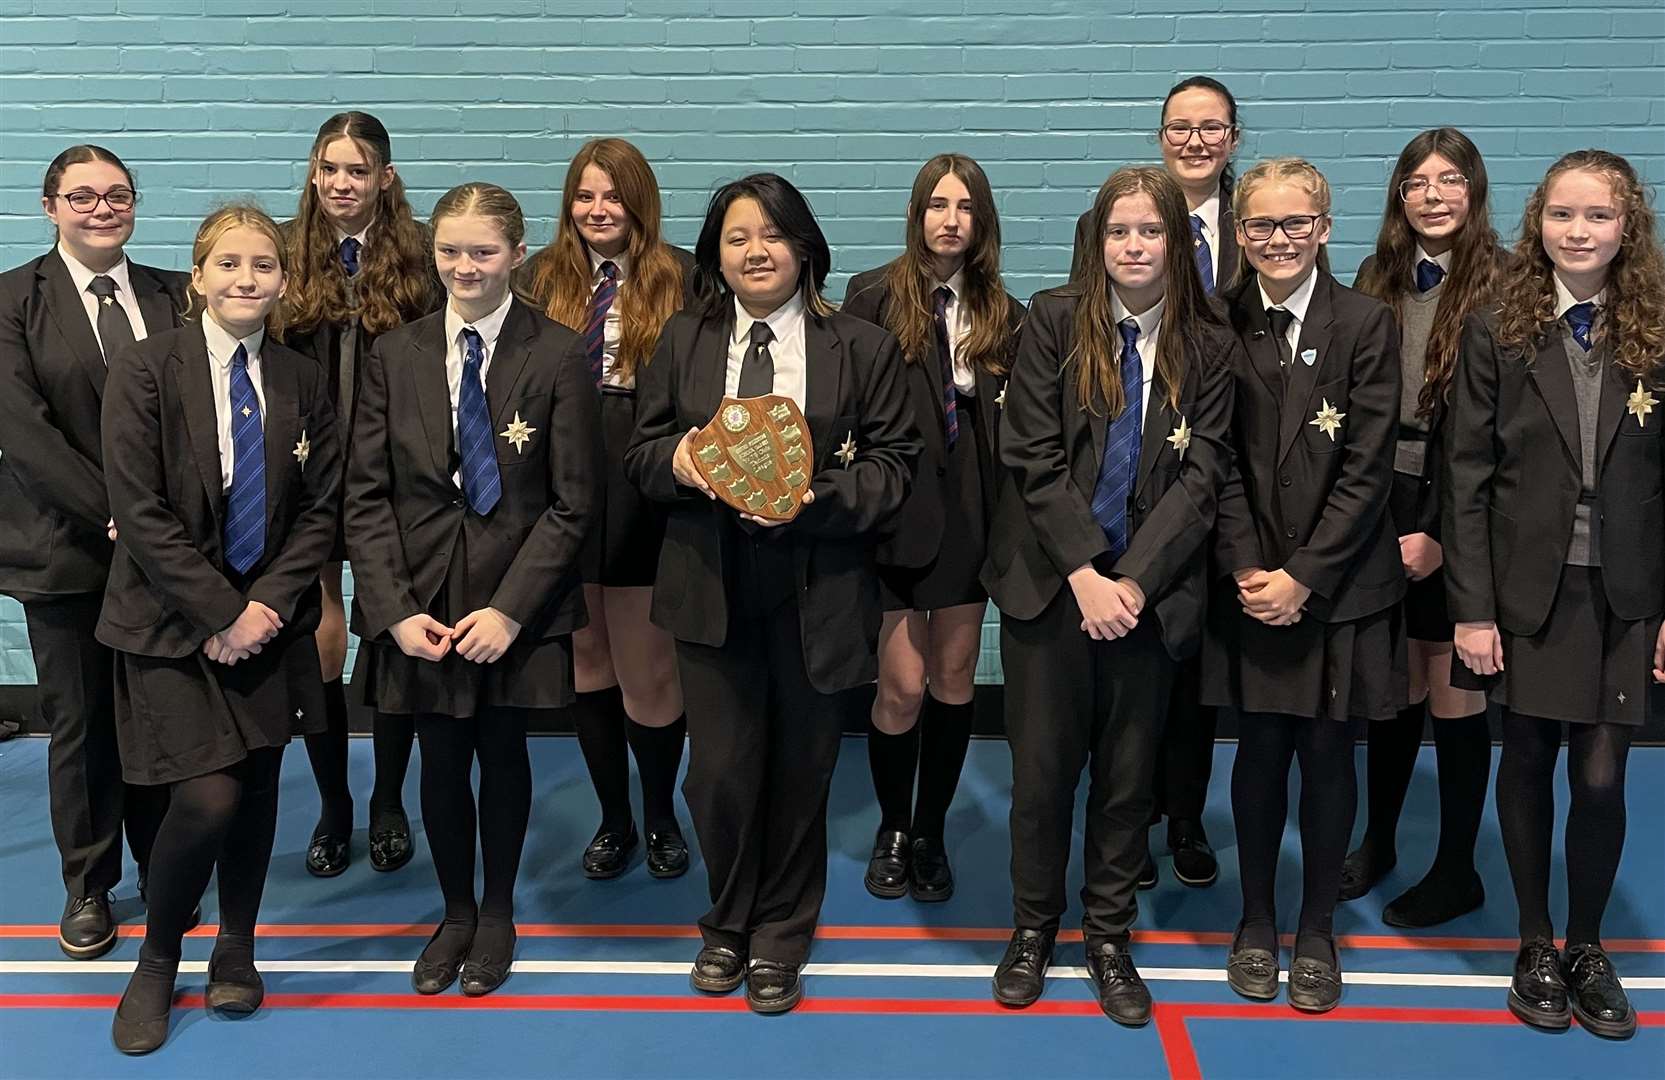 The North School's under-13 girls tennis team won the Ashford and District Secondary Schools Tennis League